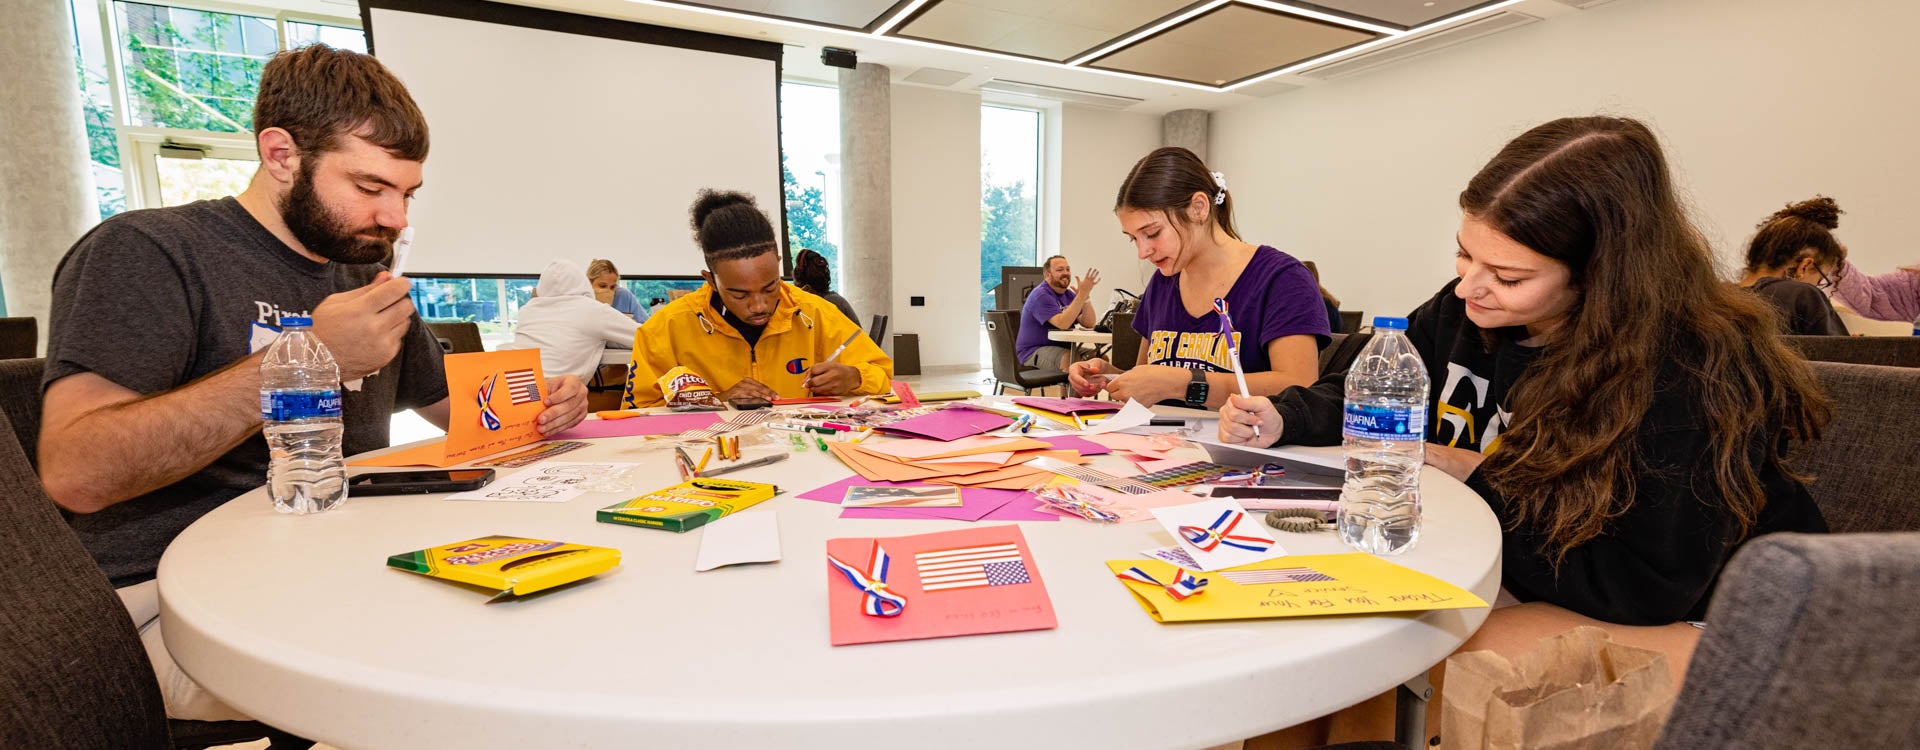 Students make material for troops overseas. Students were working with Packs4Patriots during the 9/11 Day of Service in the MCSC. (ECU Photo by Cliff Hollis)